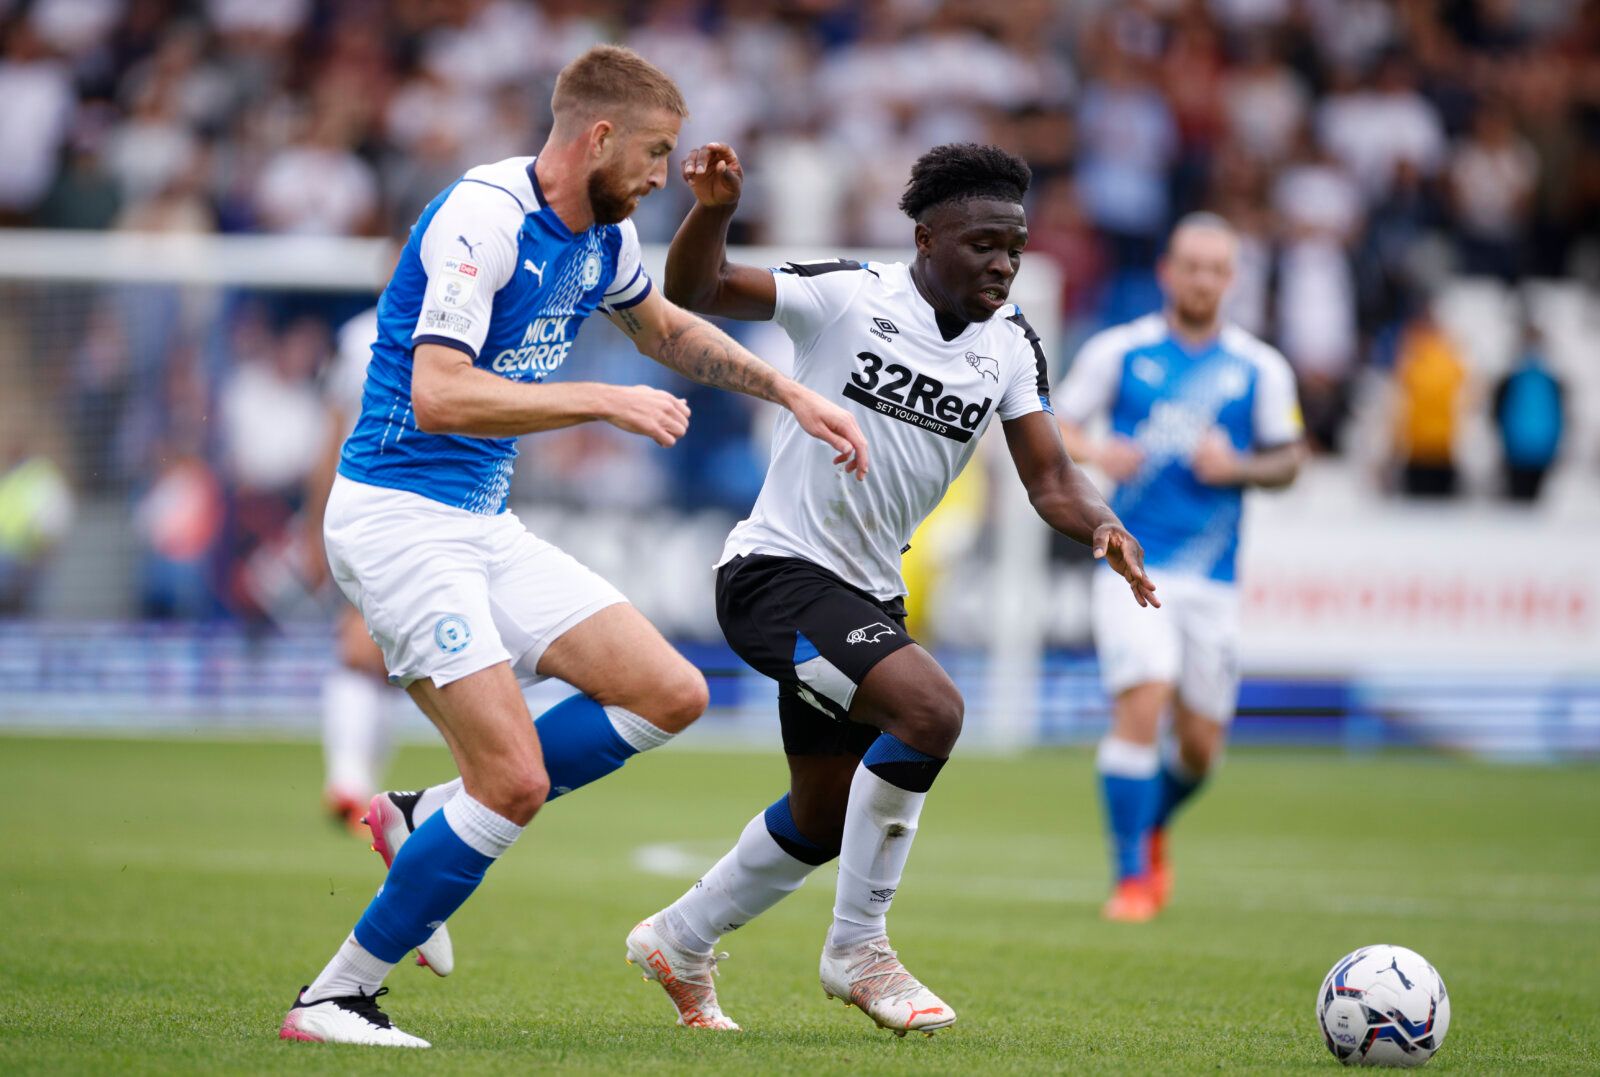 Soccer Football - Championship - Peterborough United v Derby County - Weston Homes Stadium, Peterborough, Britain - August 14, 2021 Derby County's Festy Ebosele in action with Peterborough United's Mark Beevers Action Images/John Sibley EDITORIAL USE ONLY. No use with unauthorized audio, video, data, fixture lists, club/league logos or 'live' services. Online in-match use limited to 75 images, no video emulation. No use in betting, games or single club /league/player publications.  Please contac